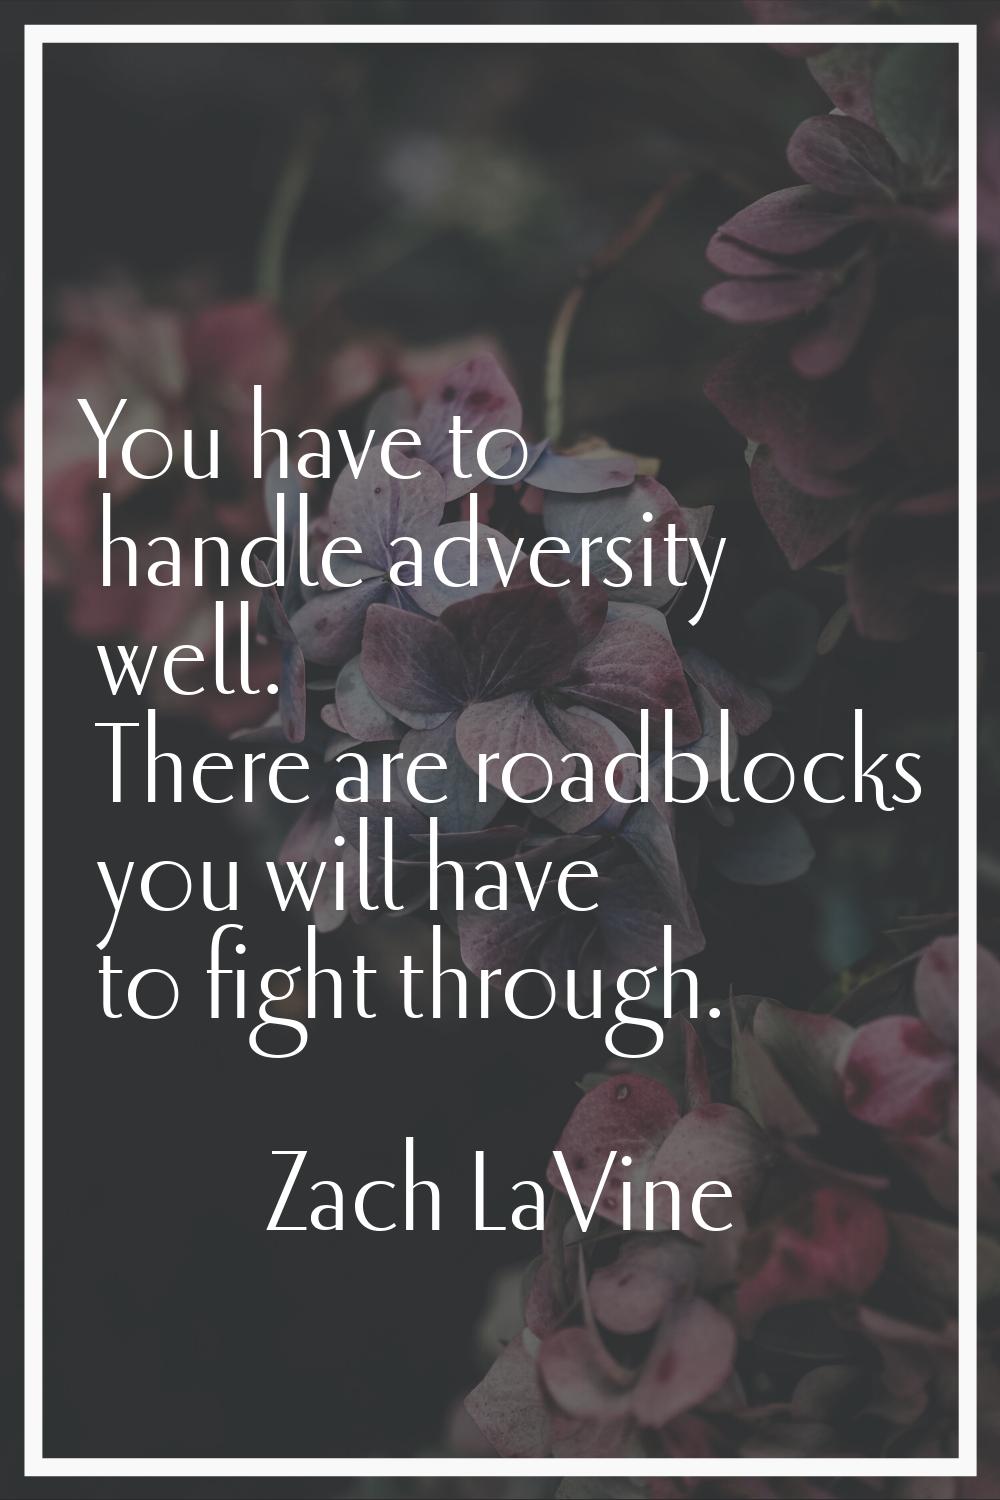 You have to handle adversity well. There are roadblocks you will have to fight through.